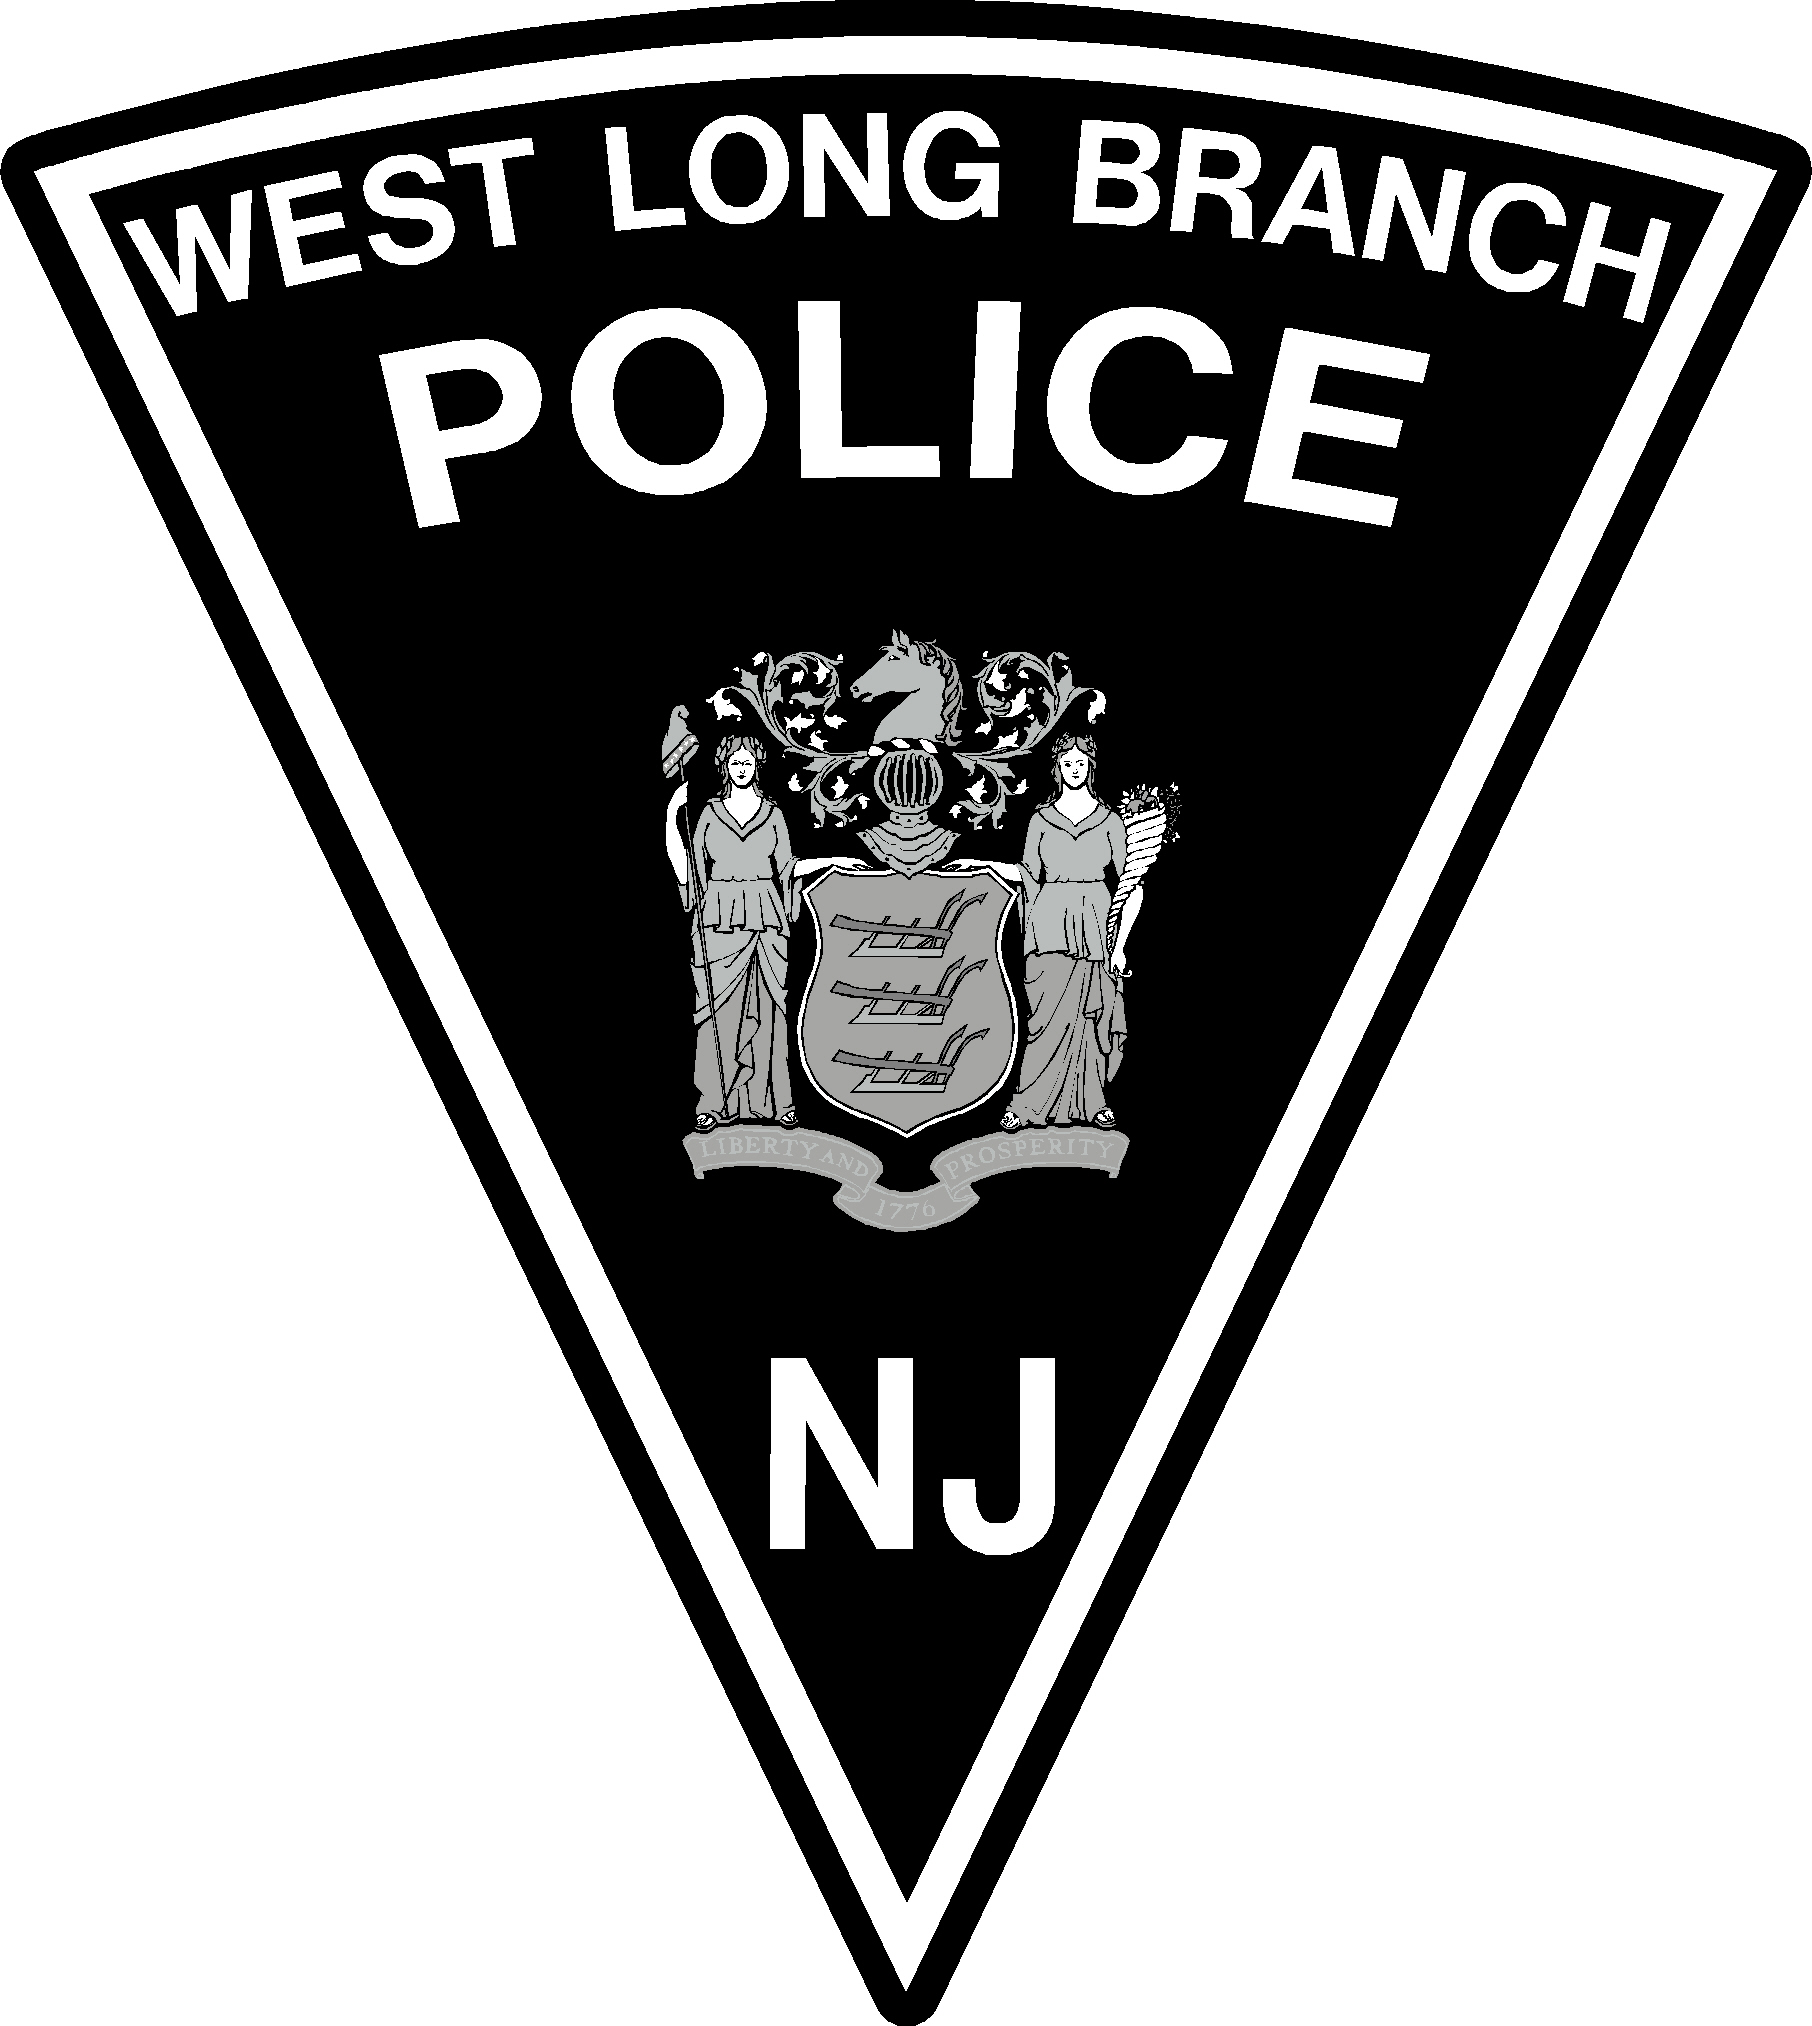 West Long Branch Police Department, NJ Police Jobs